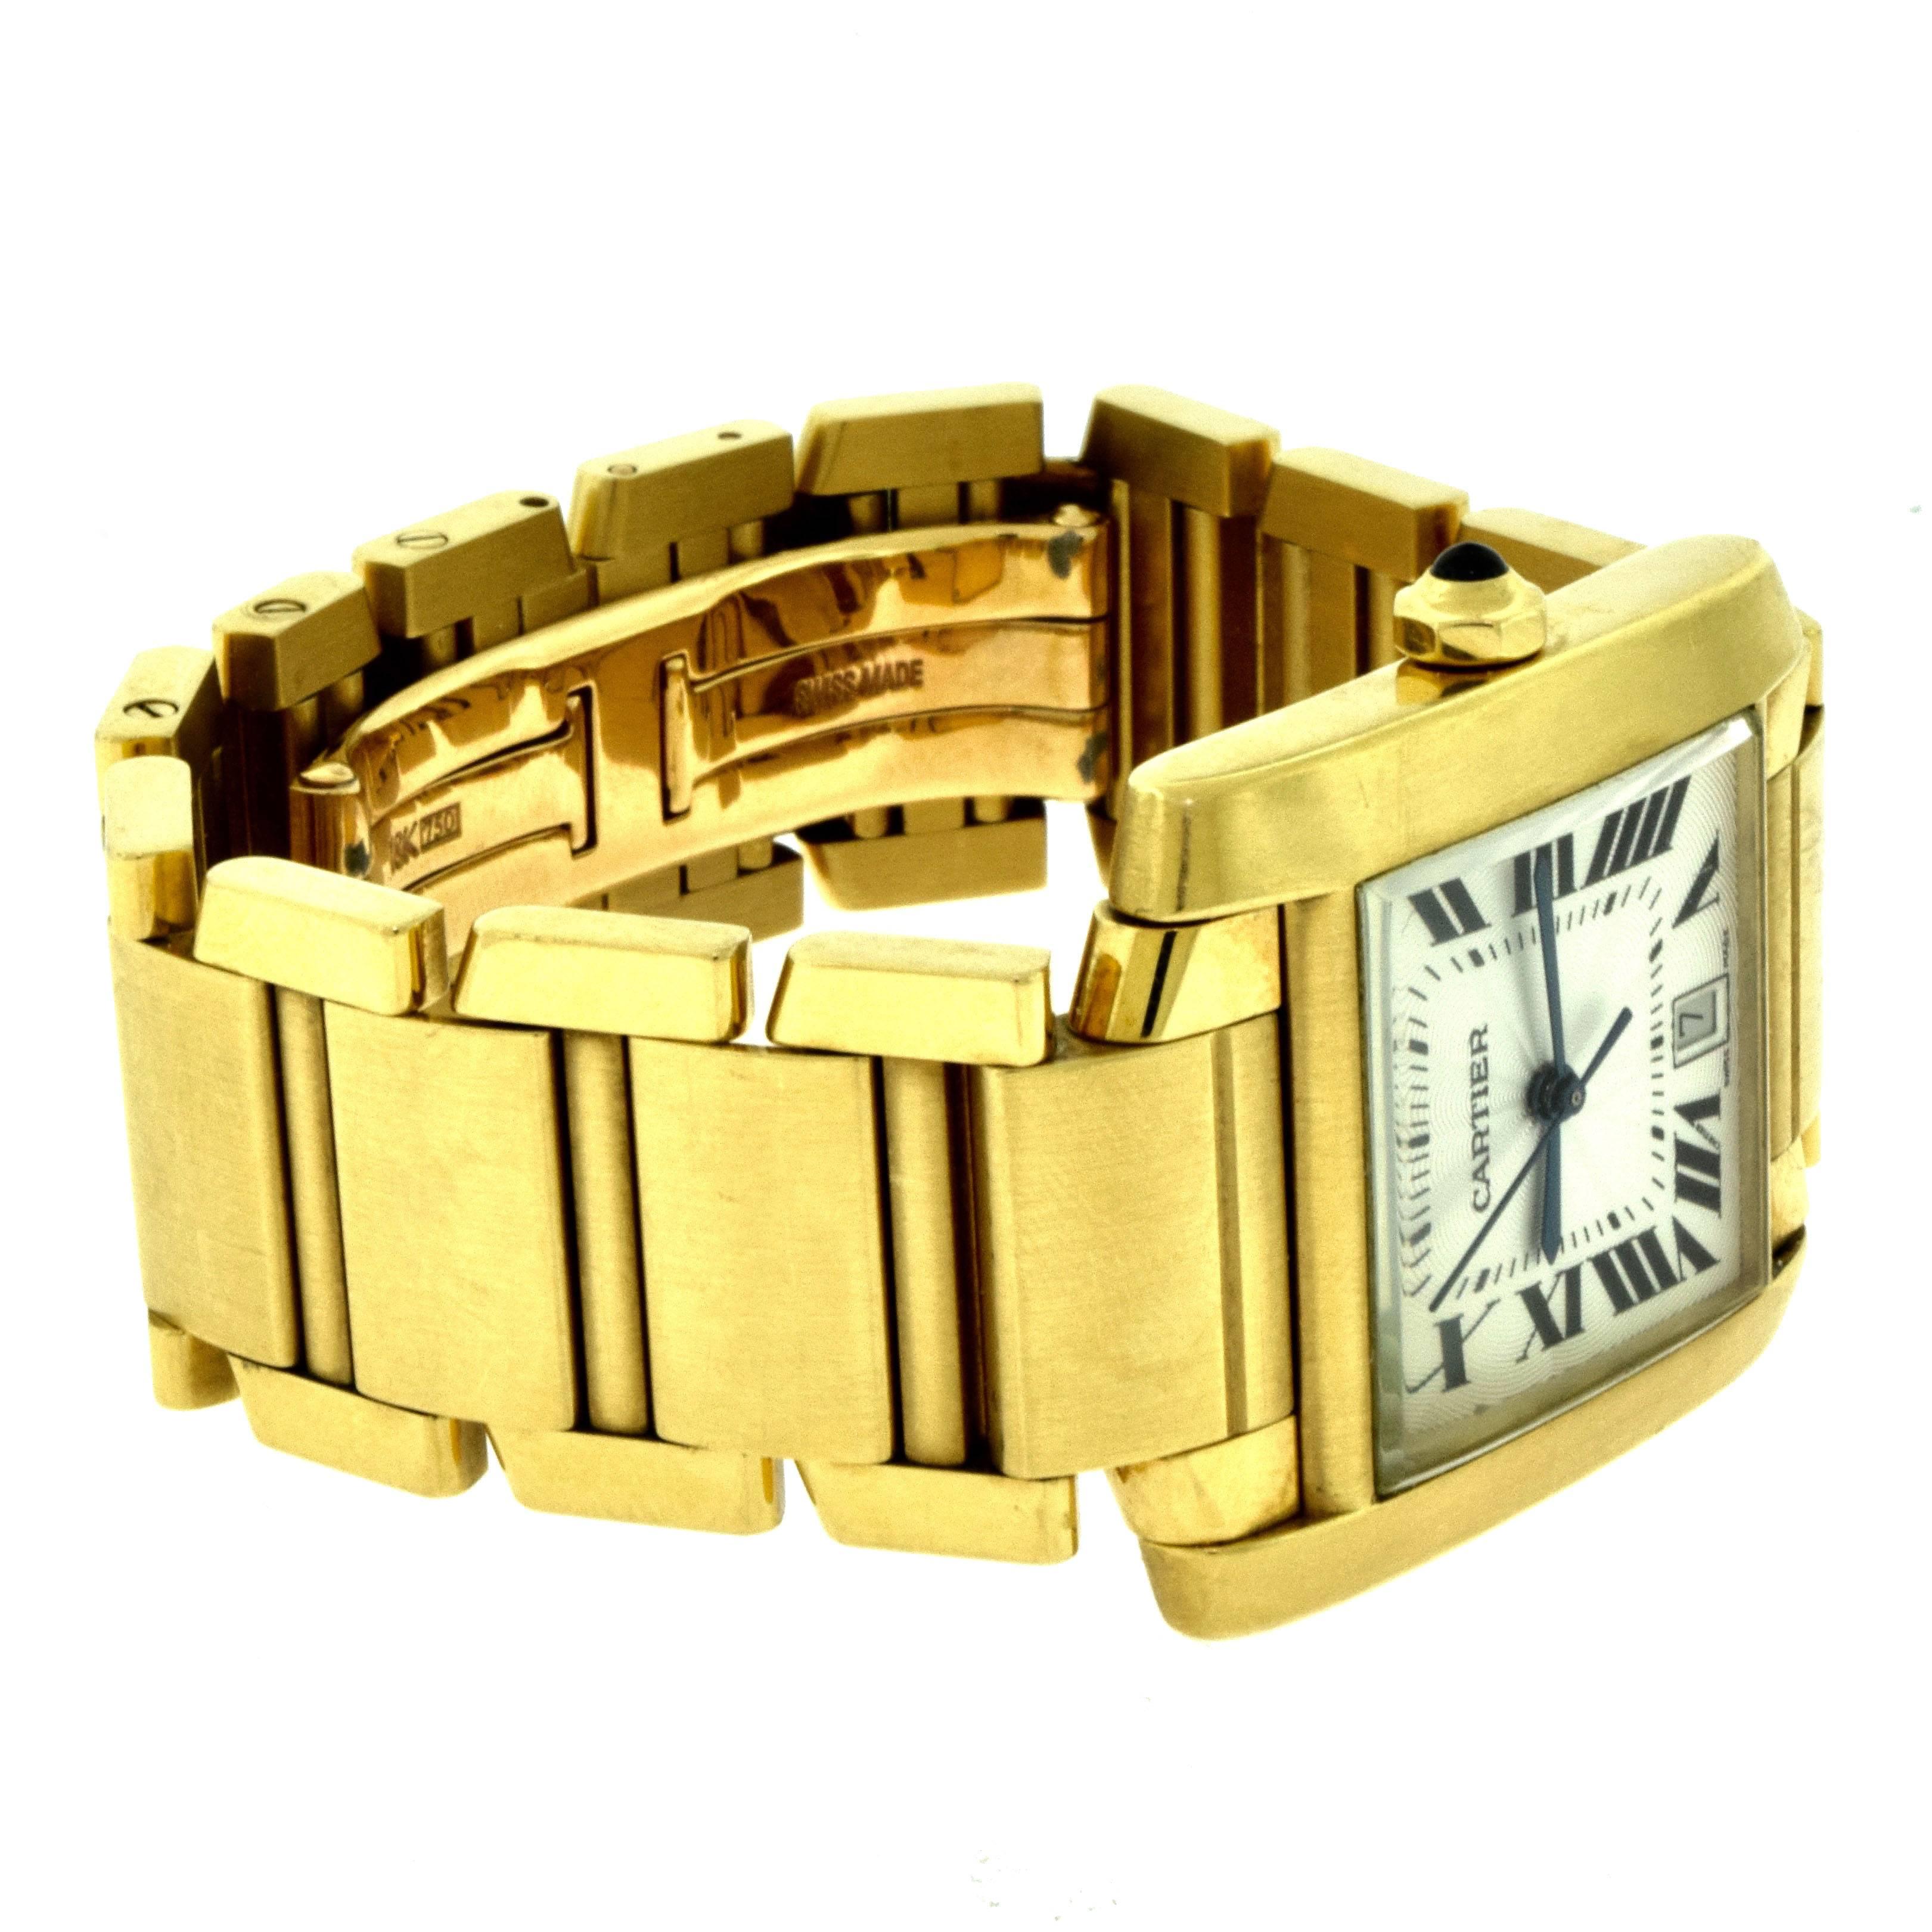 Designer: Cartier
Collection: Tank
Model Name: Française 1840
Movement: Automatic
Case Shape: Tank
Case Material: 18k Yellow Gold
Case Diameter: 28 mm
Watch Length: 32 mm
Watch Height: 8 mm
Hand Style: Sword, Blued Steel
Numerical Style: Roman
Dial